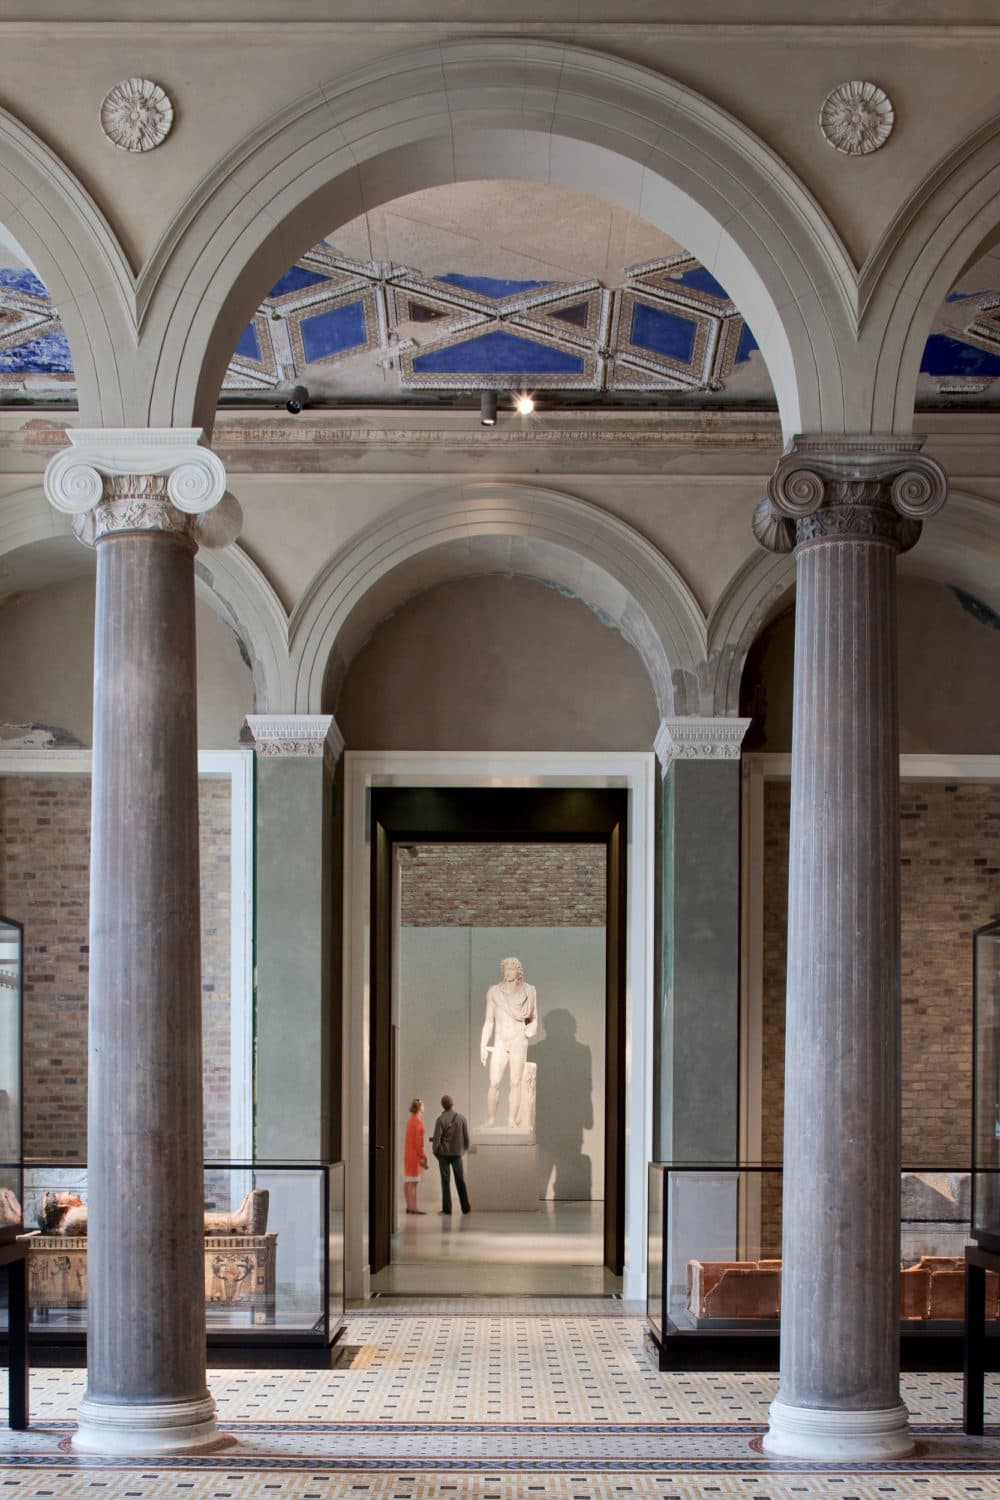 The Neues Museum. (Courtesy of SMB / Ute Zscharnt for David Chipperfield Architects)